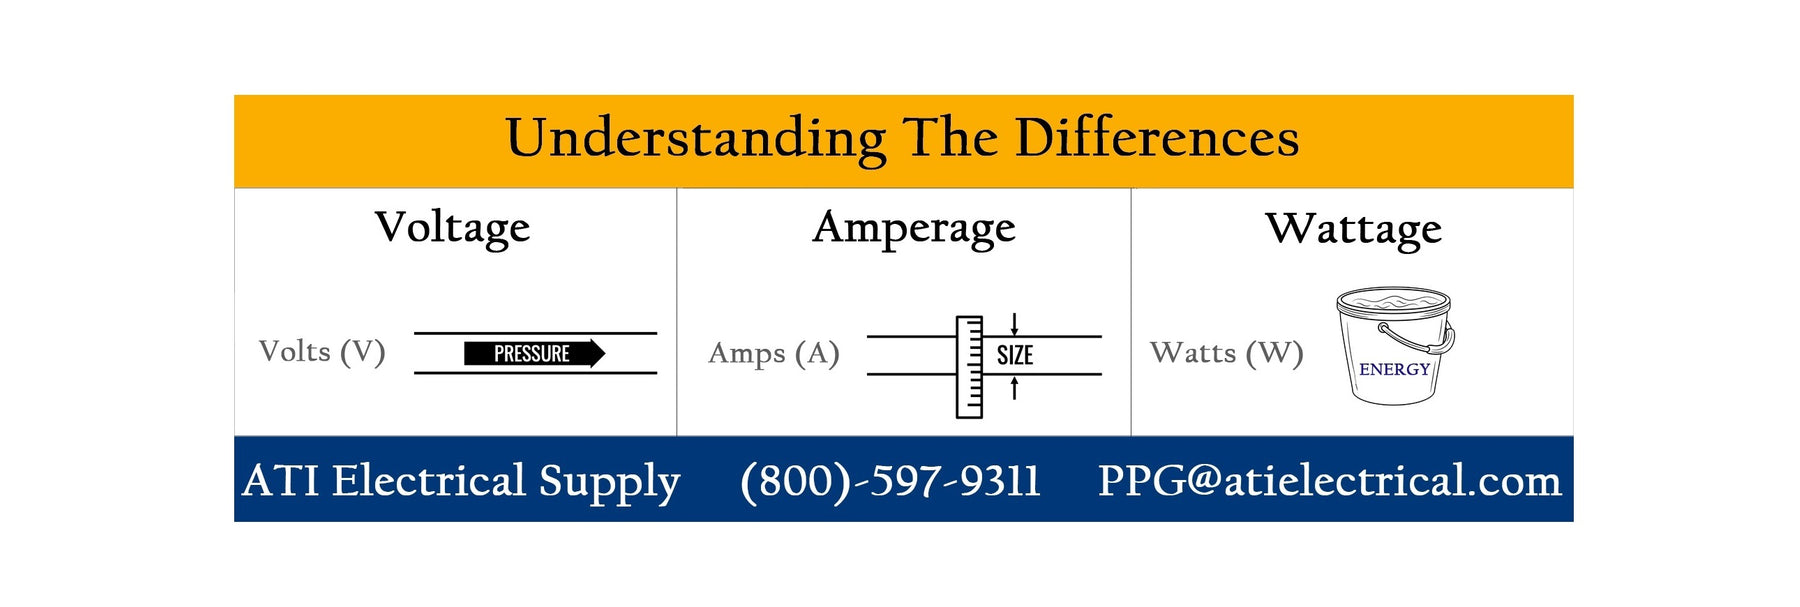 Difference Between Voltage, Amperage, and Wattage